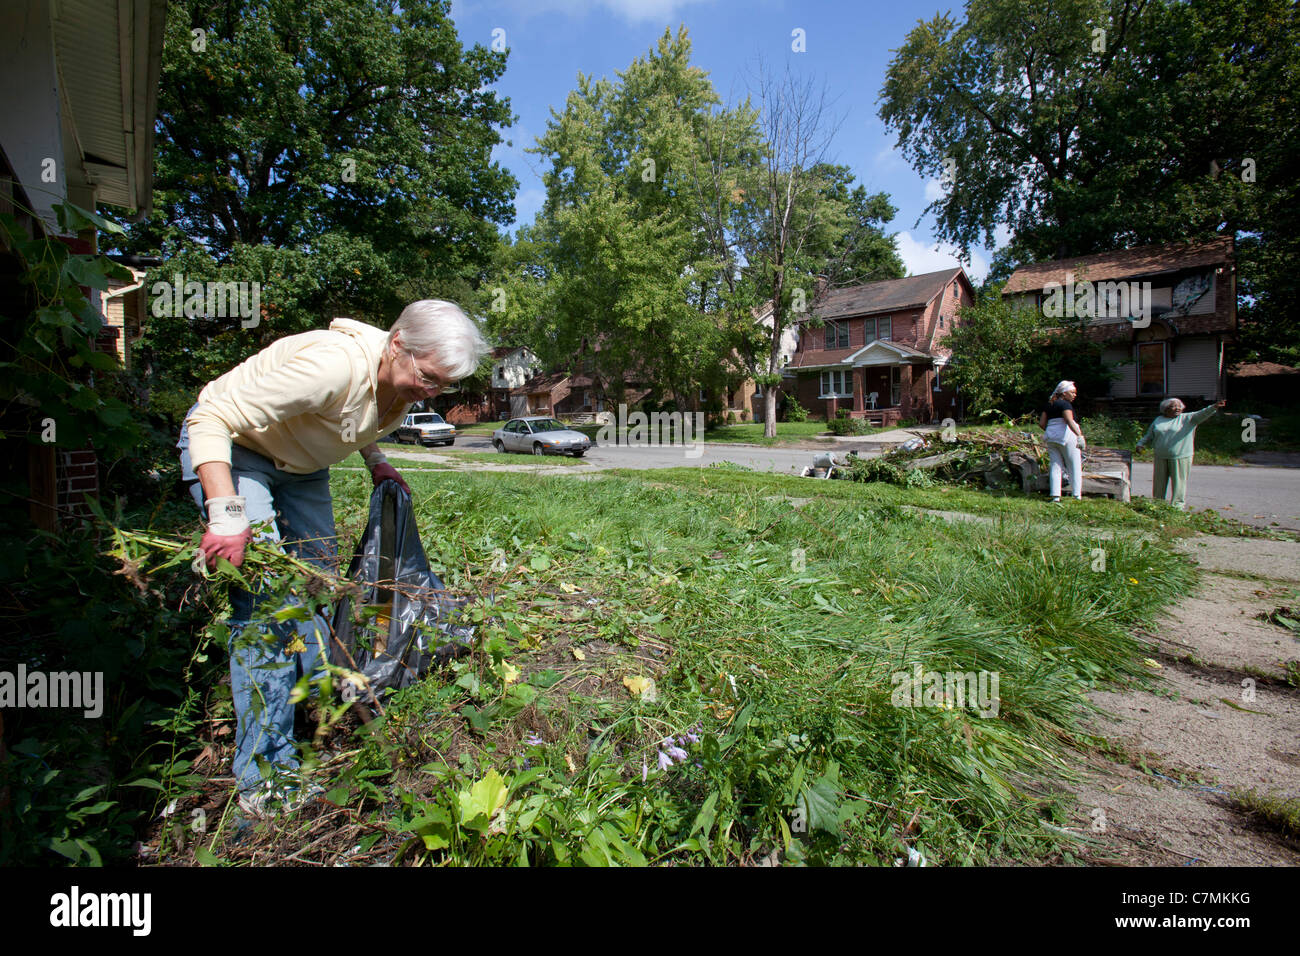 Detroit, Michigan - Members of the Three Mile Drive block club clean trash and weeds from a vacant home in their neighborhood. Stock Photo